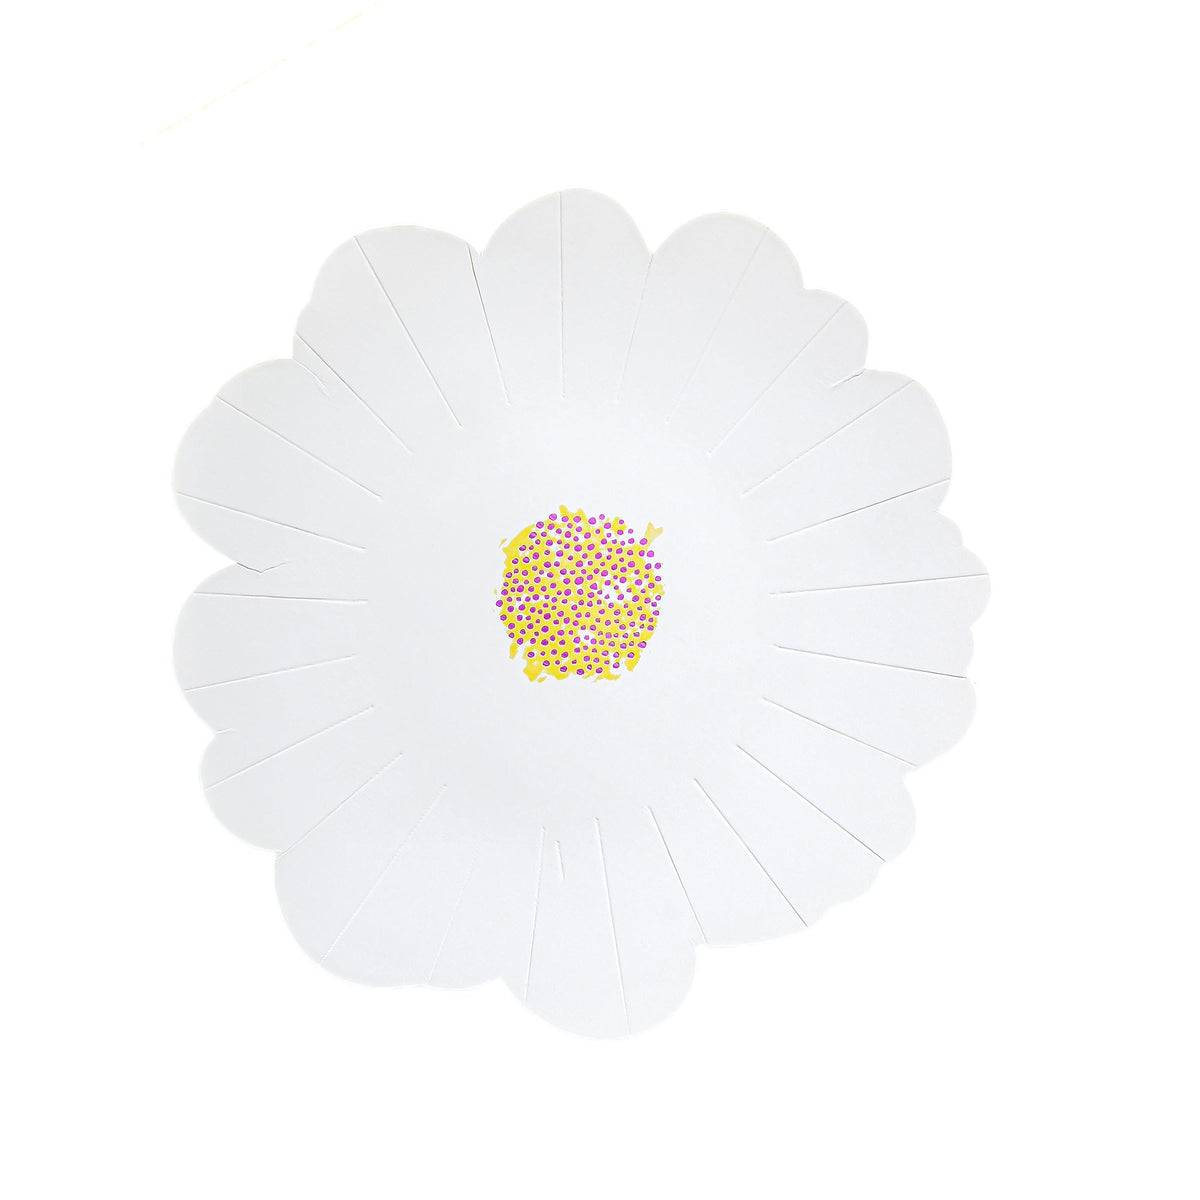 YIWU SANDY PAPER PRODUCTS CO., LTD Everyday Entertaining Floral Paradise Small Flower-Shaped Dessert Paper Plates, White, 7 Inches, 8 Count 810120712529